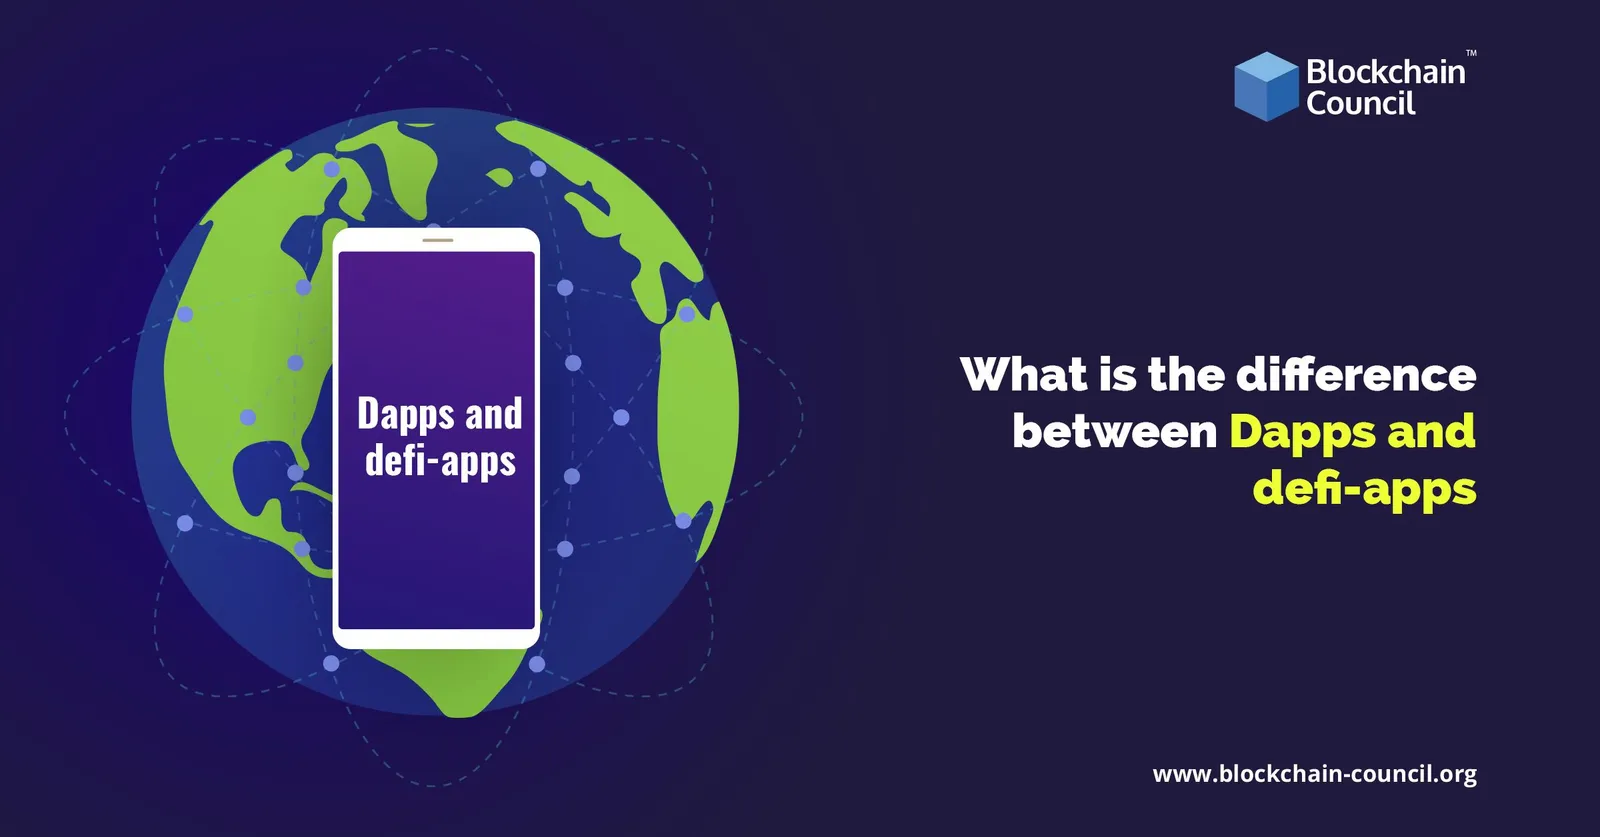 What are the distinctions between Dapps and Defi-apps?